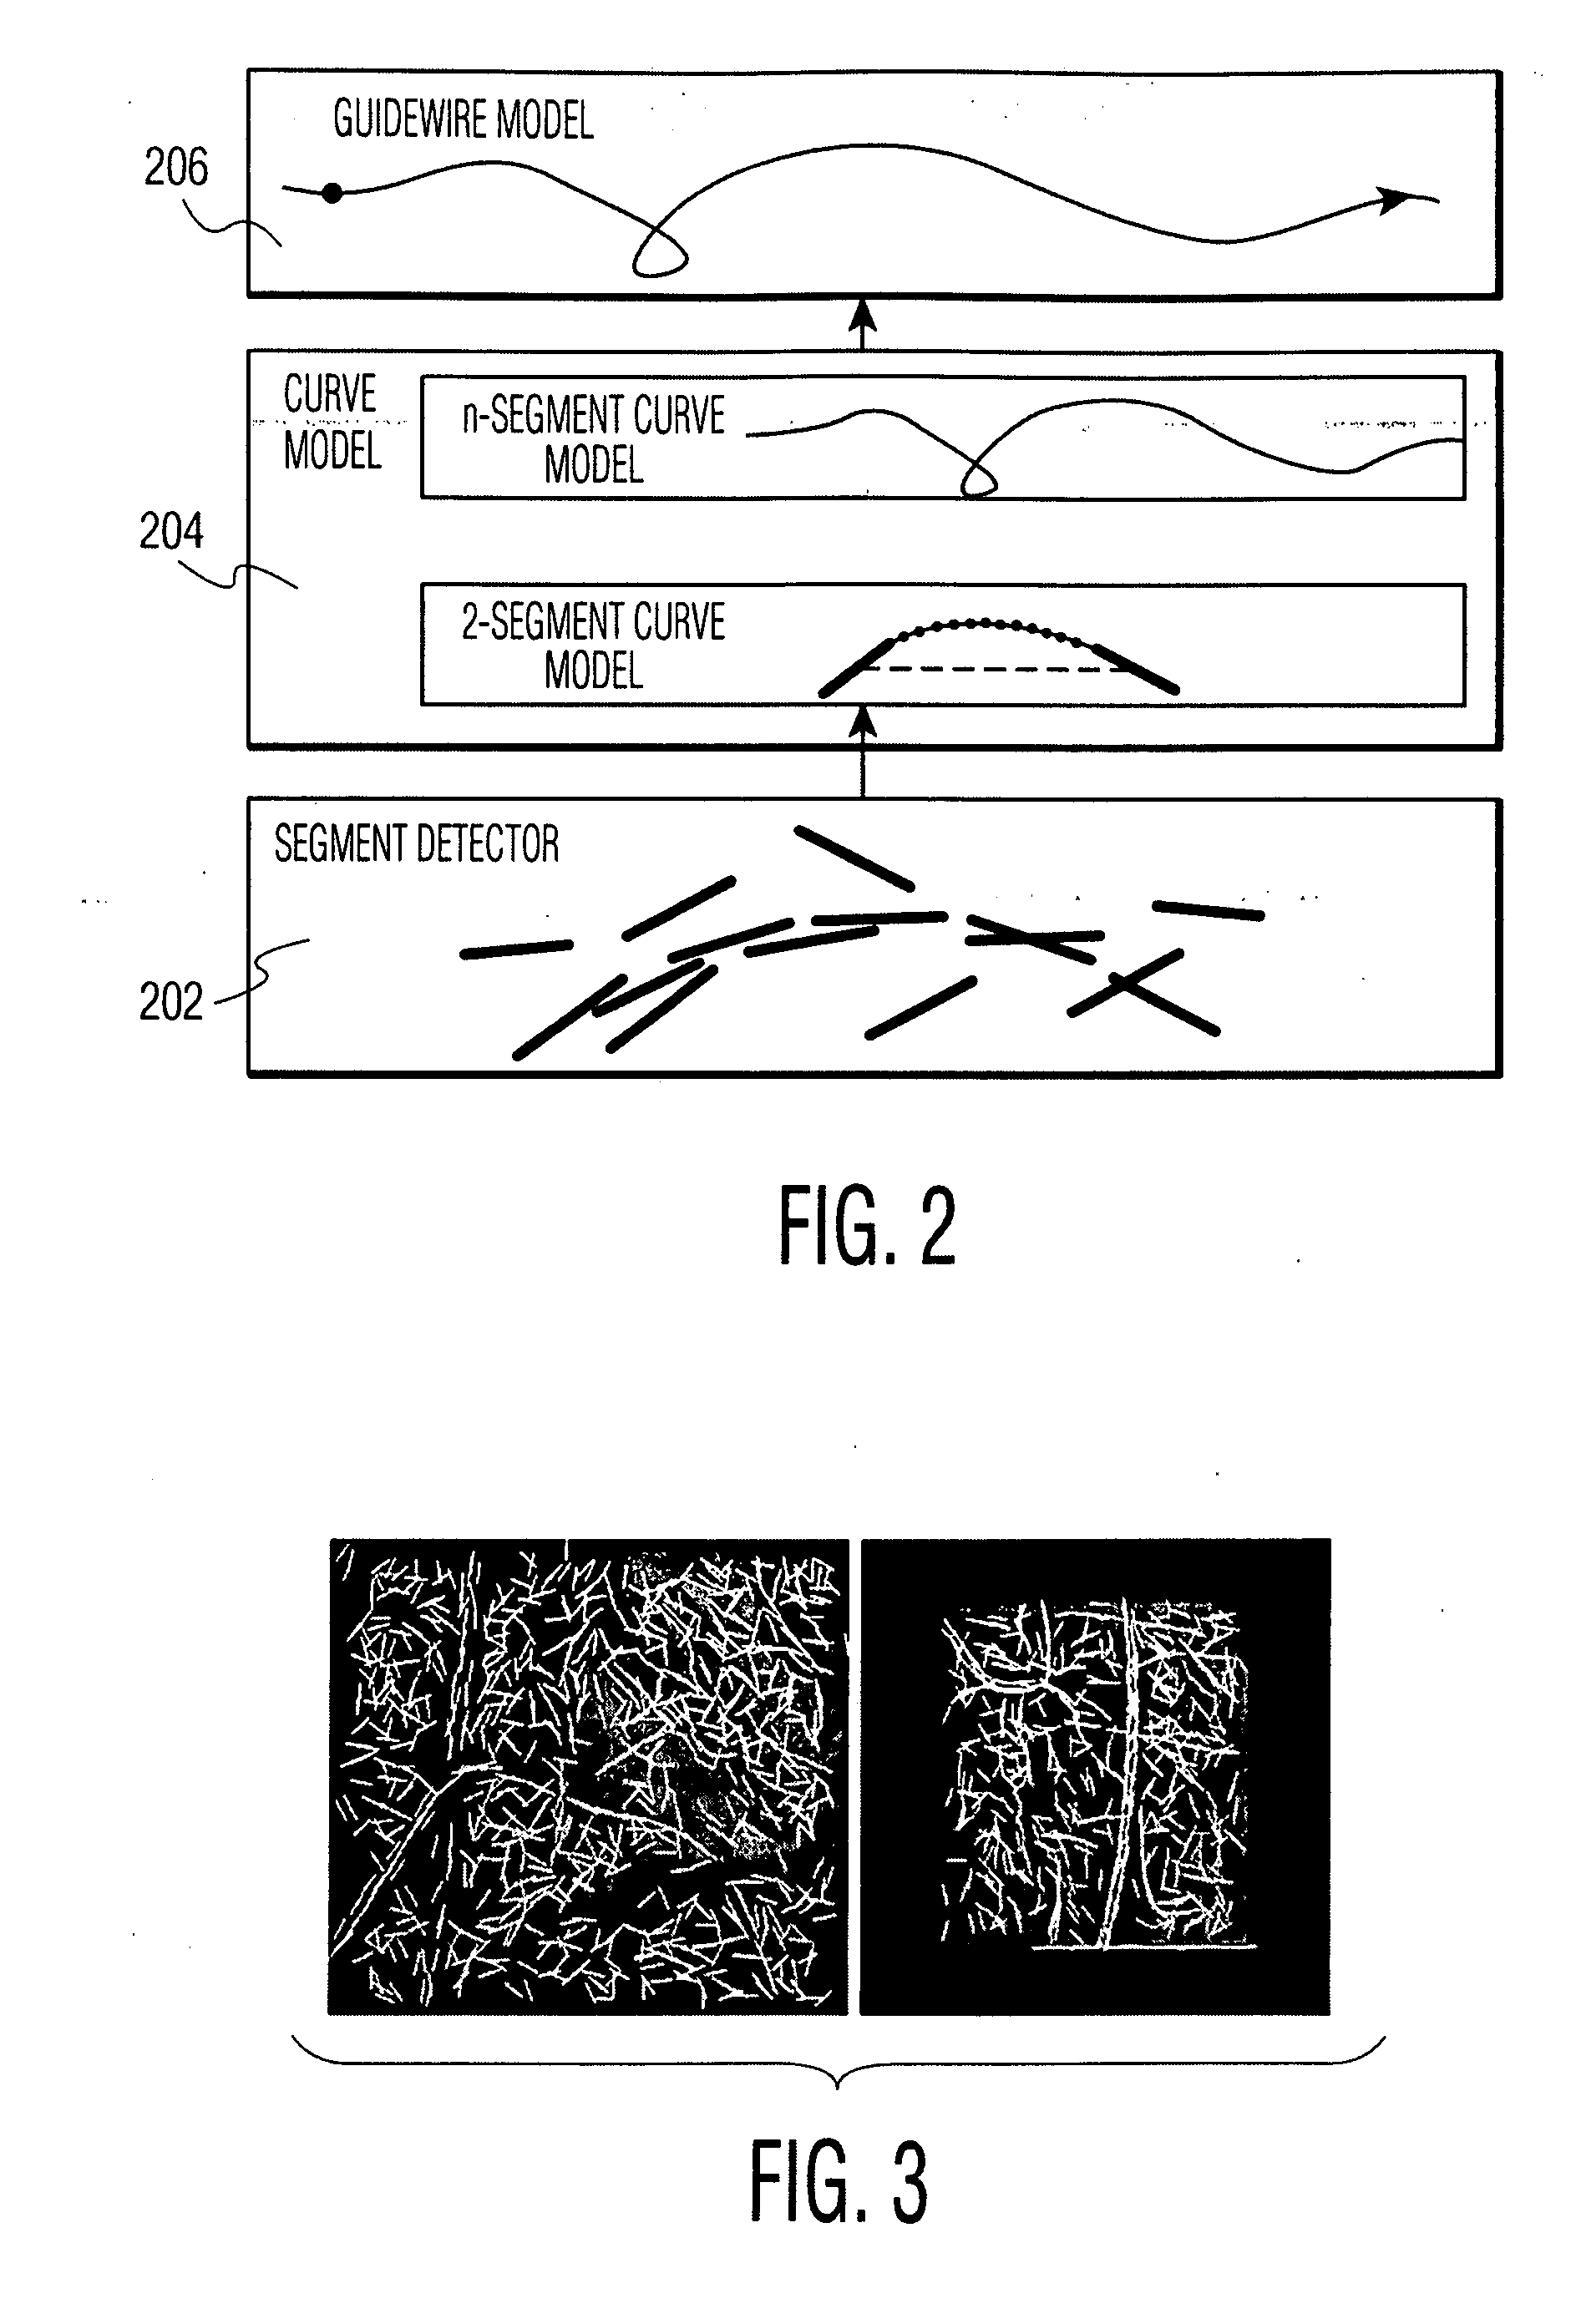 System and Method For Detecting and Tracking A Guidewire In A Fluoroscopic Image Sequence